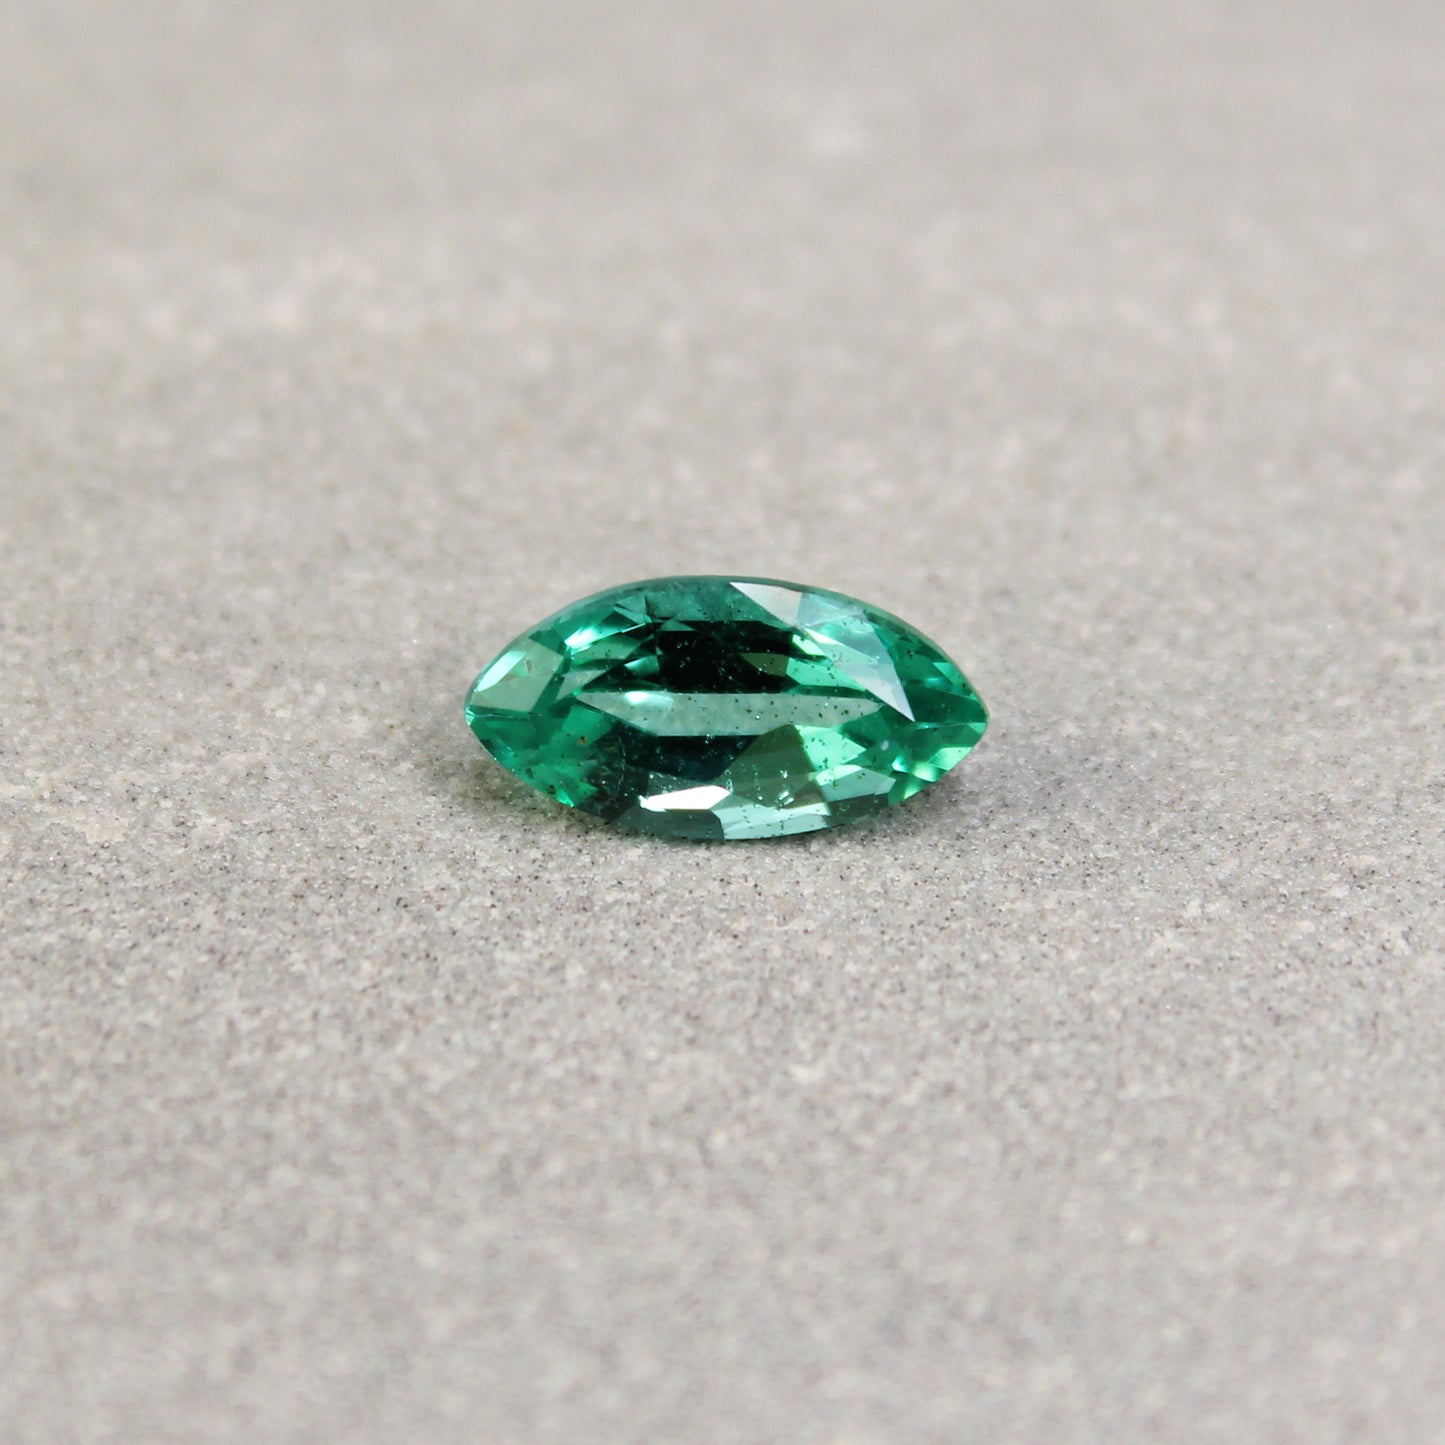 1.42ct Bluish Green, Marquise Emerald, Insignificant Oil, Russia - 10.81 x 5.46 x 4.18mm